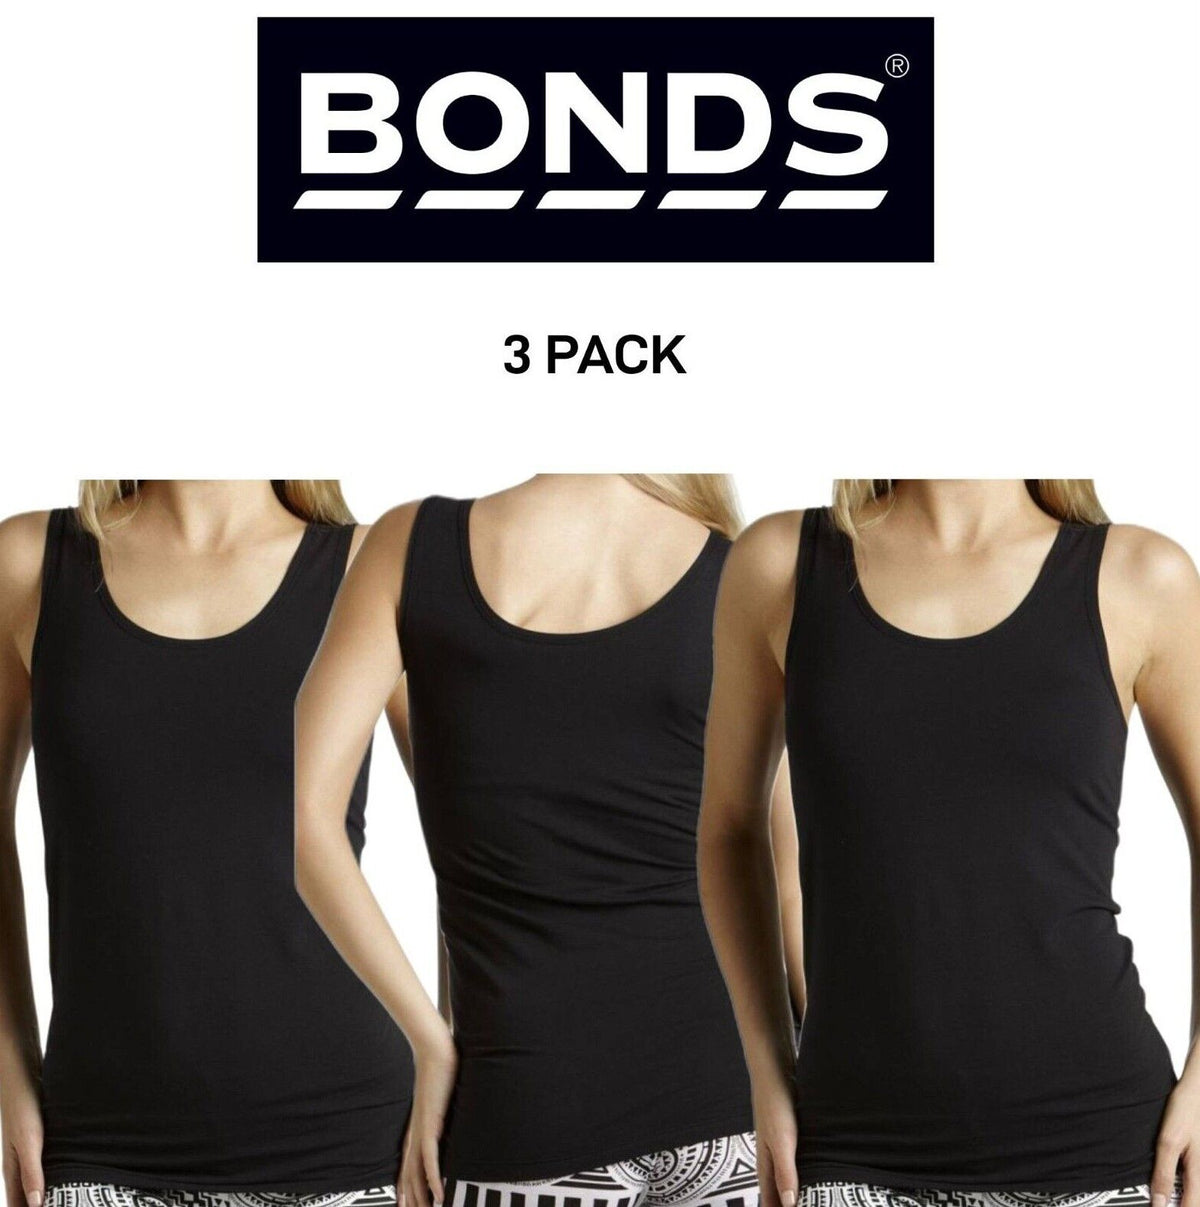 Bonds Womens Stretchy Chesty Tank Top Breathable Cotton Jersey 3 Pack WYEXY